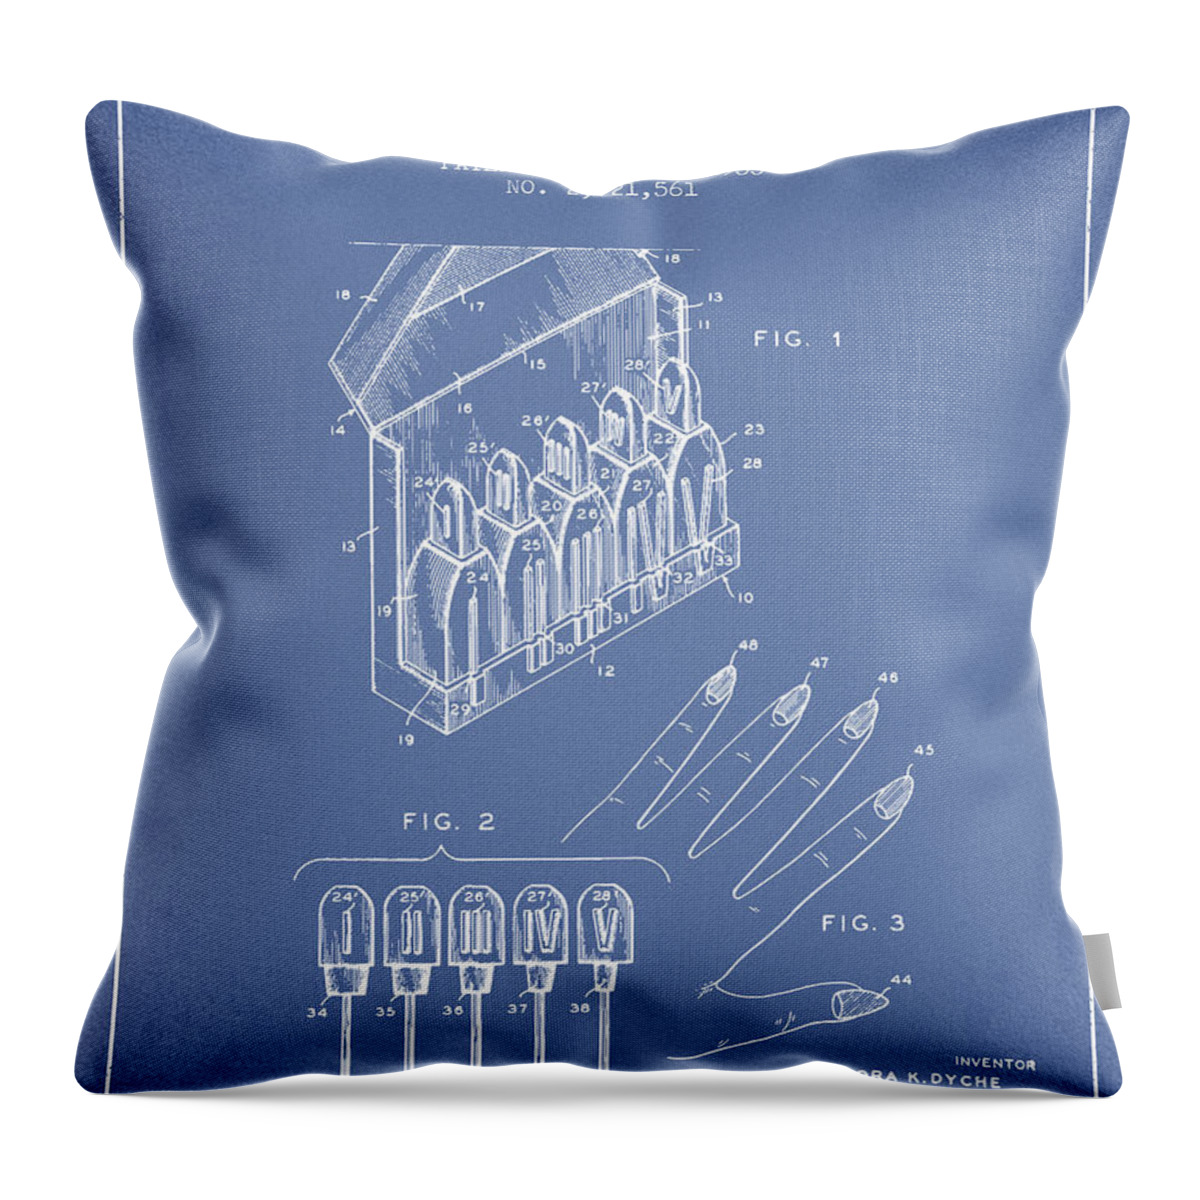 Nail Polish Throw Pillow featuring the digital art Nail Polish Kit patent from 1955 - Light Blue by Aged Pixel